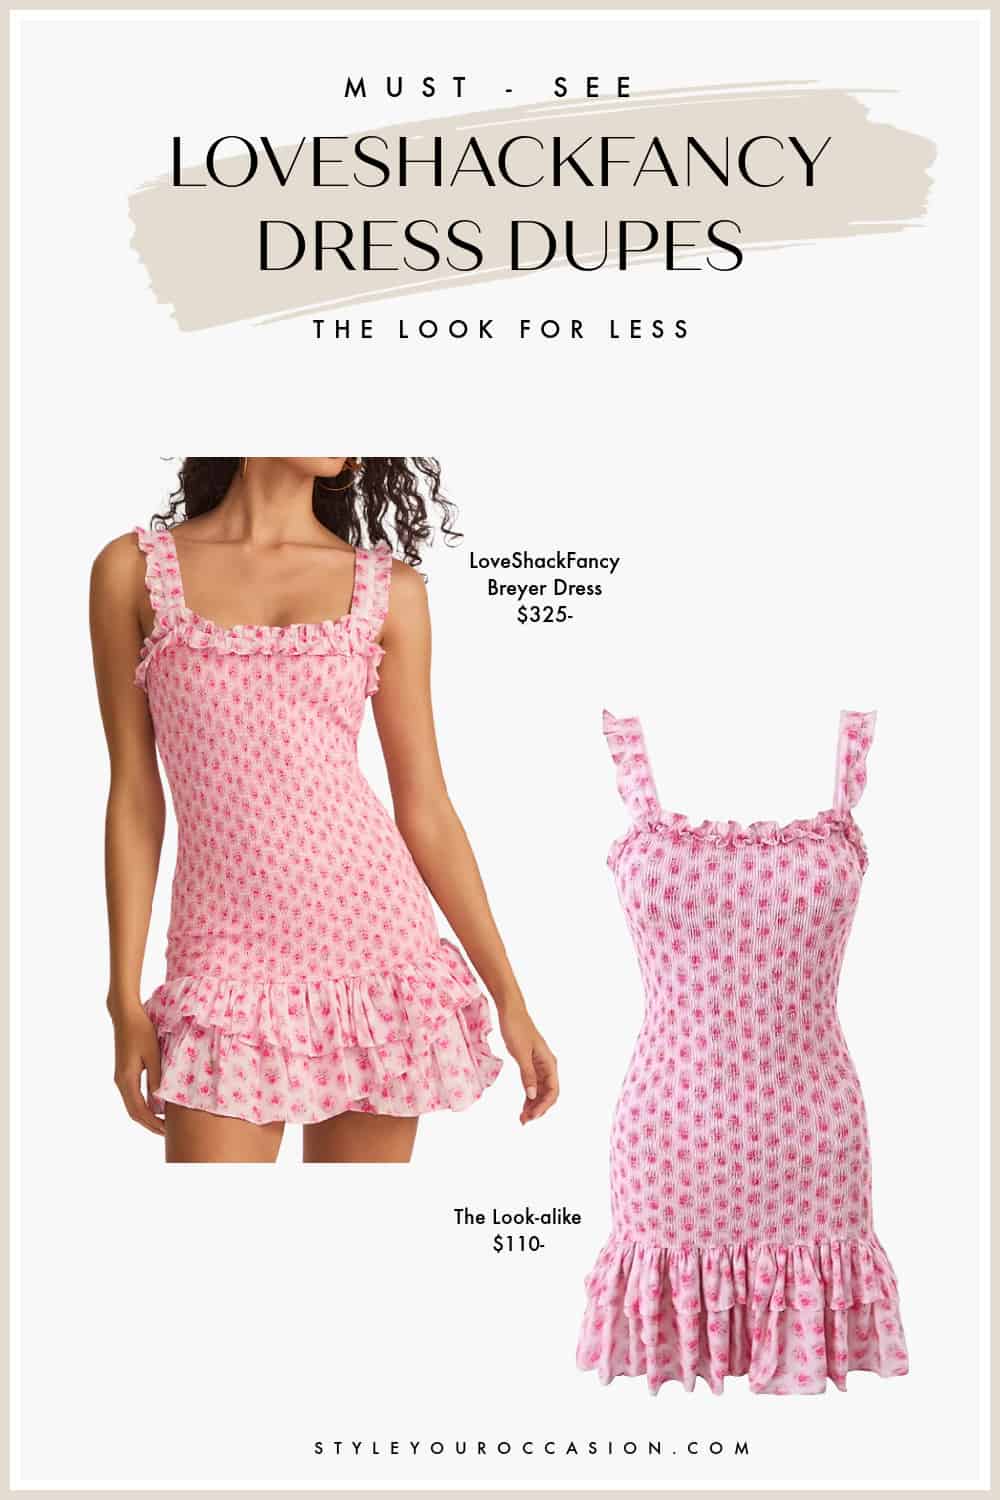 image comparing two sleeveless pink shirred floral mini dresses, one from LoveShackFancy, the other a dupe from Etsy